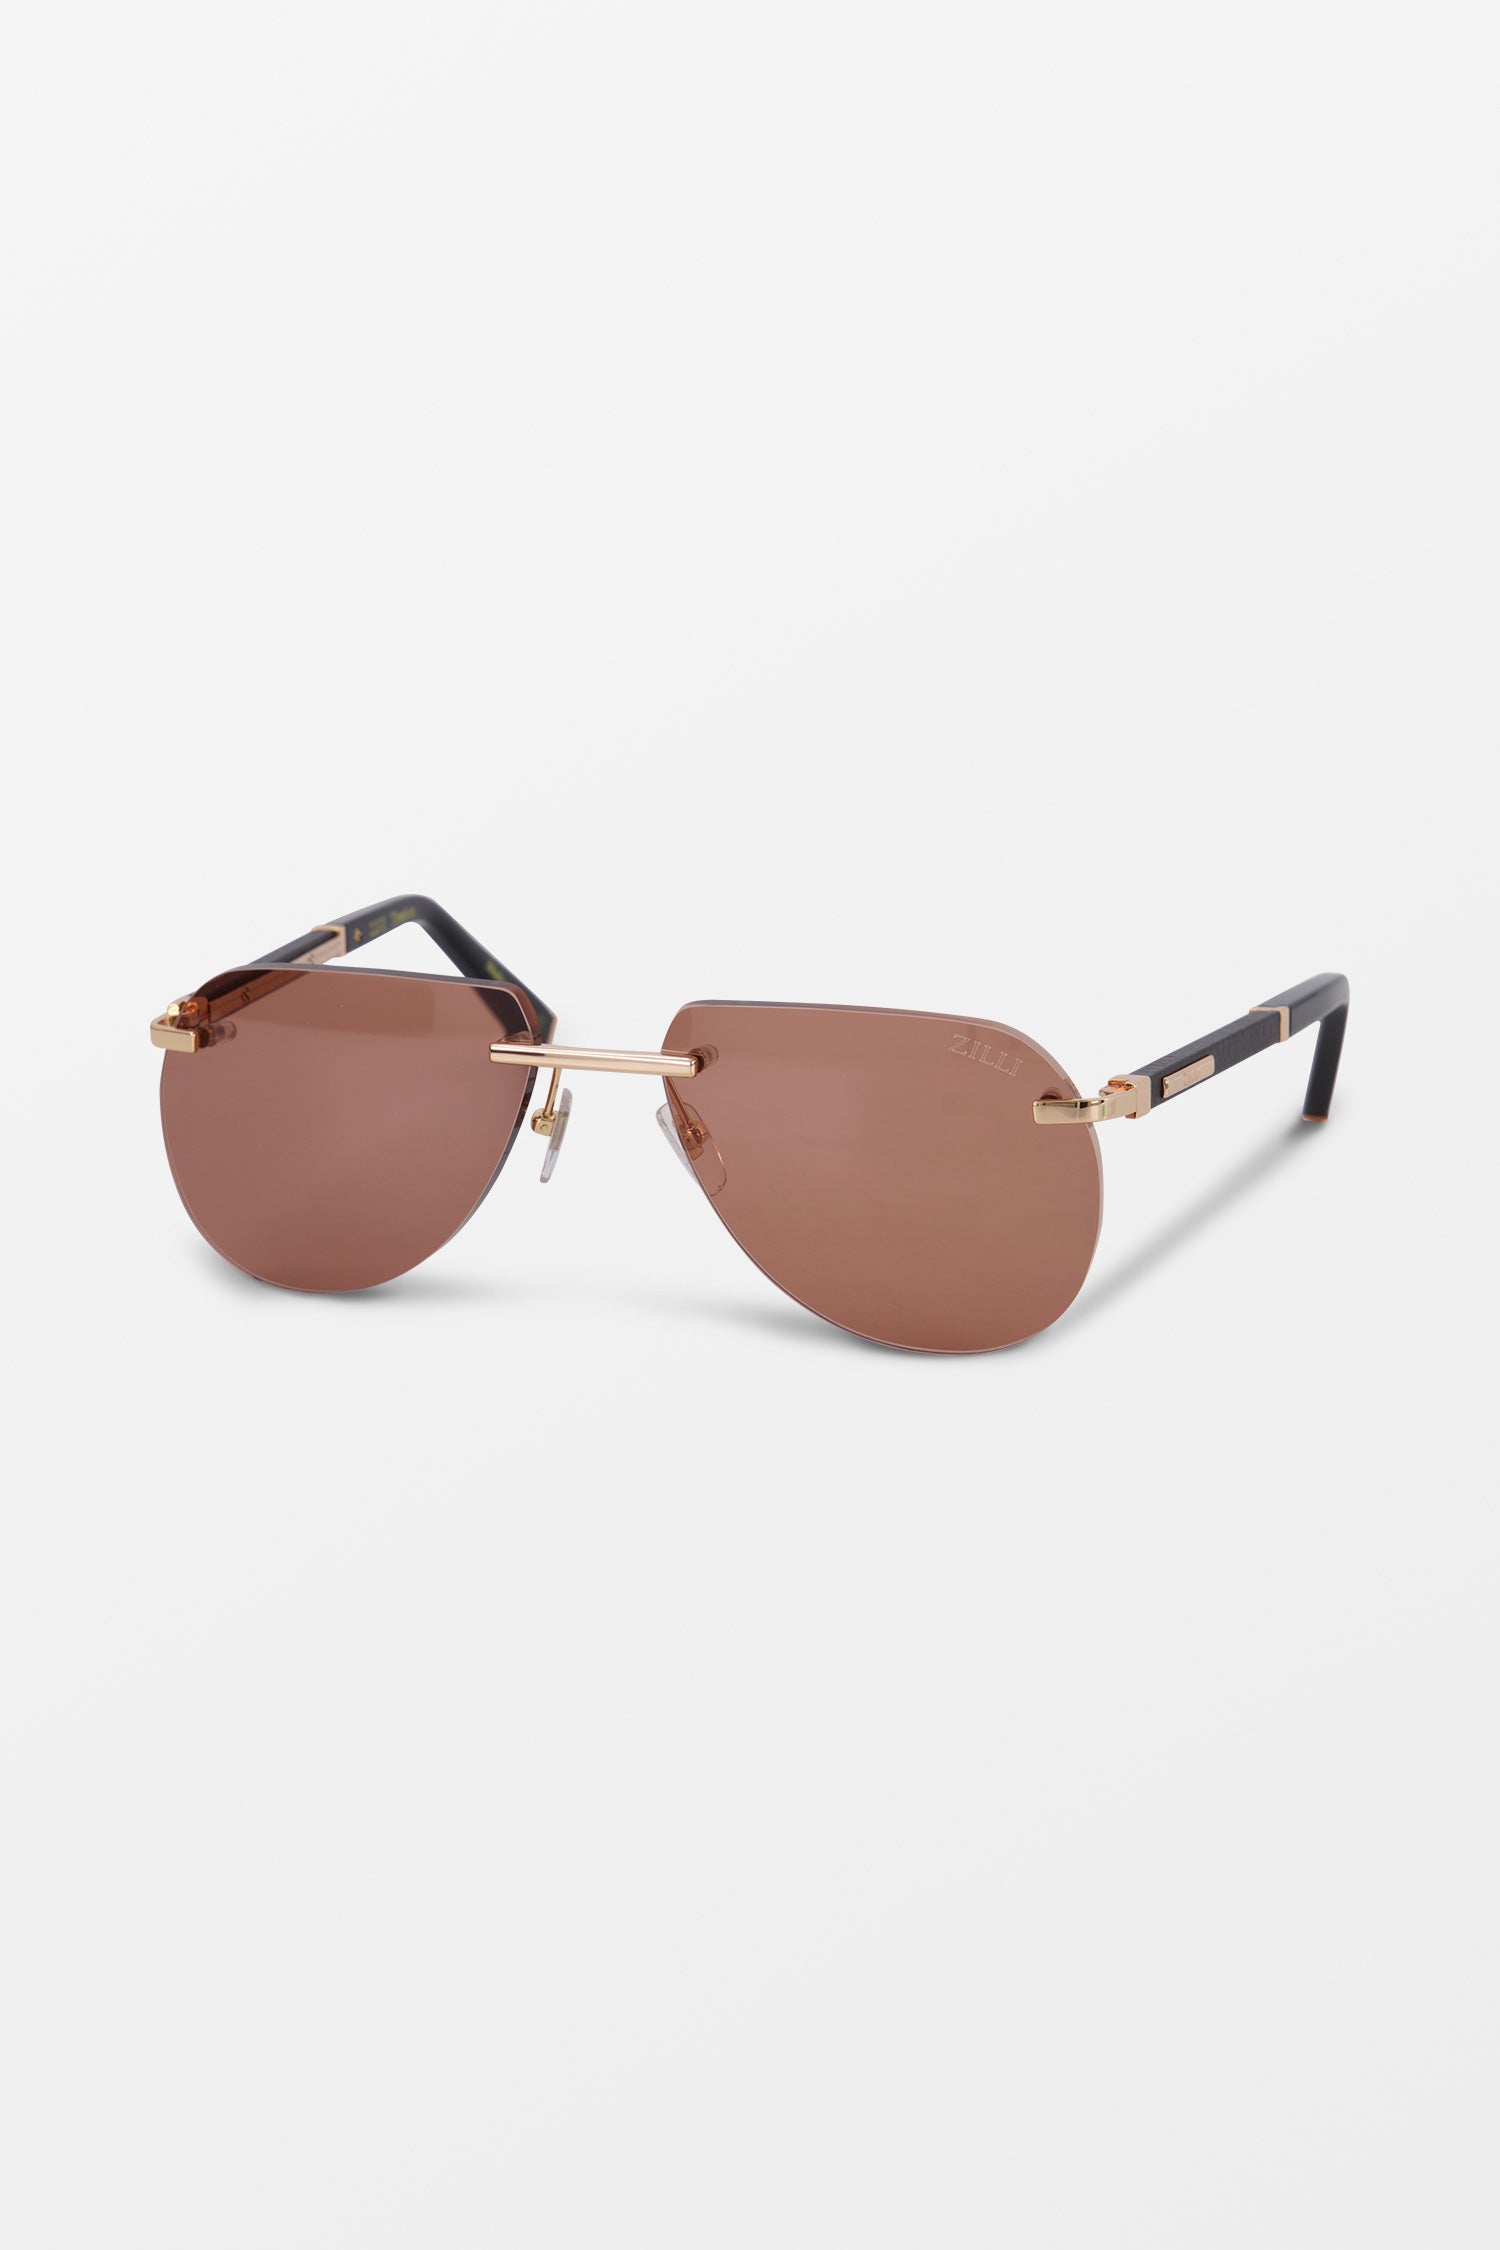 Zilli Brown Buster Sunglasses